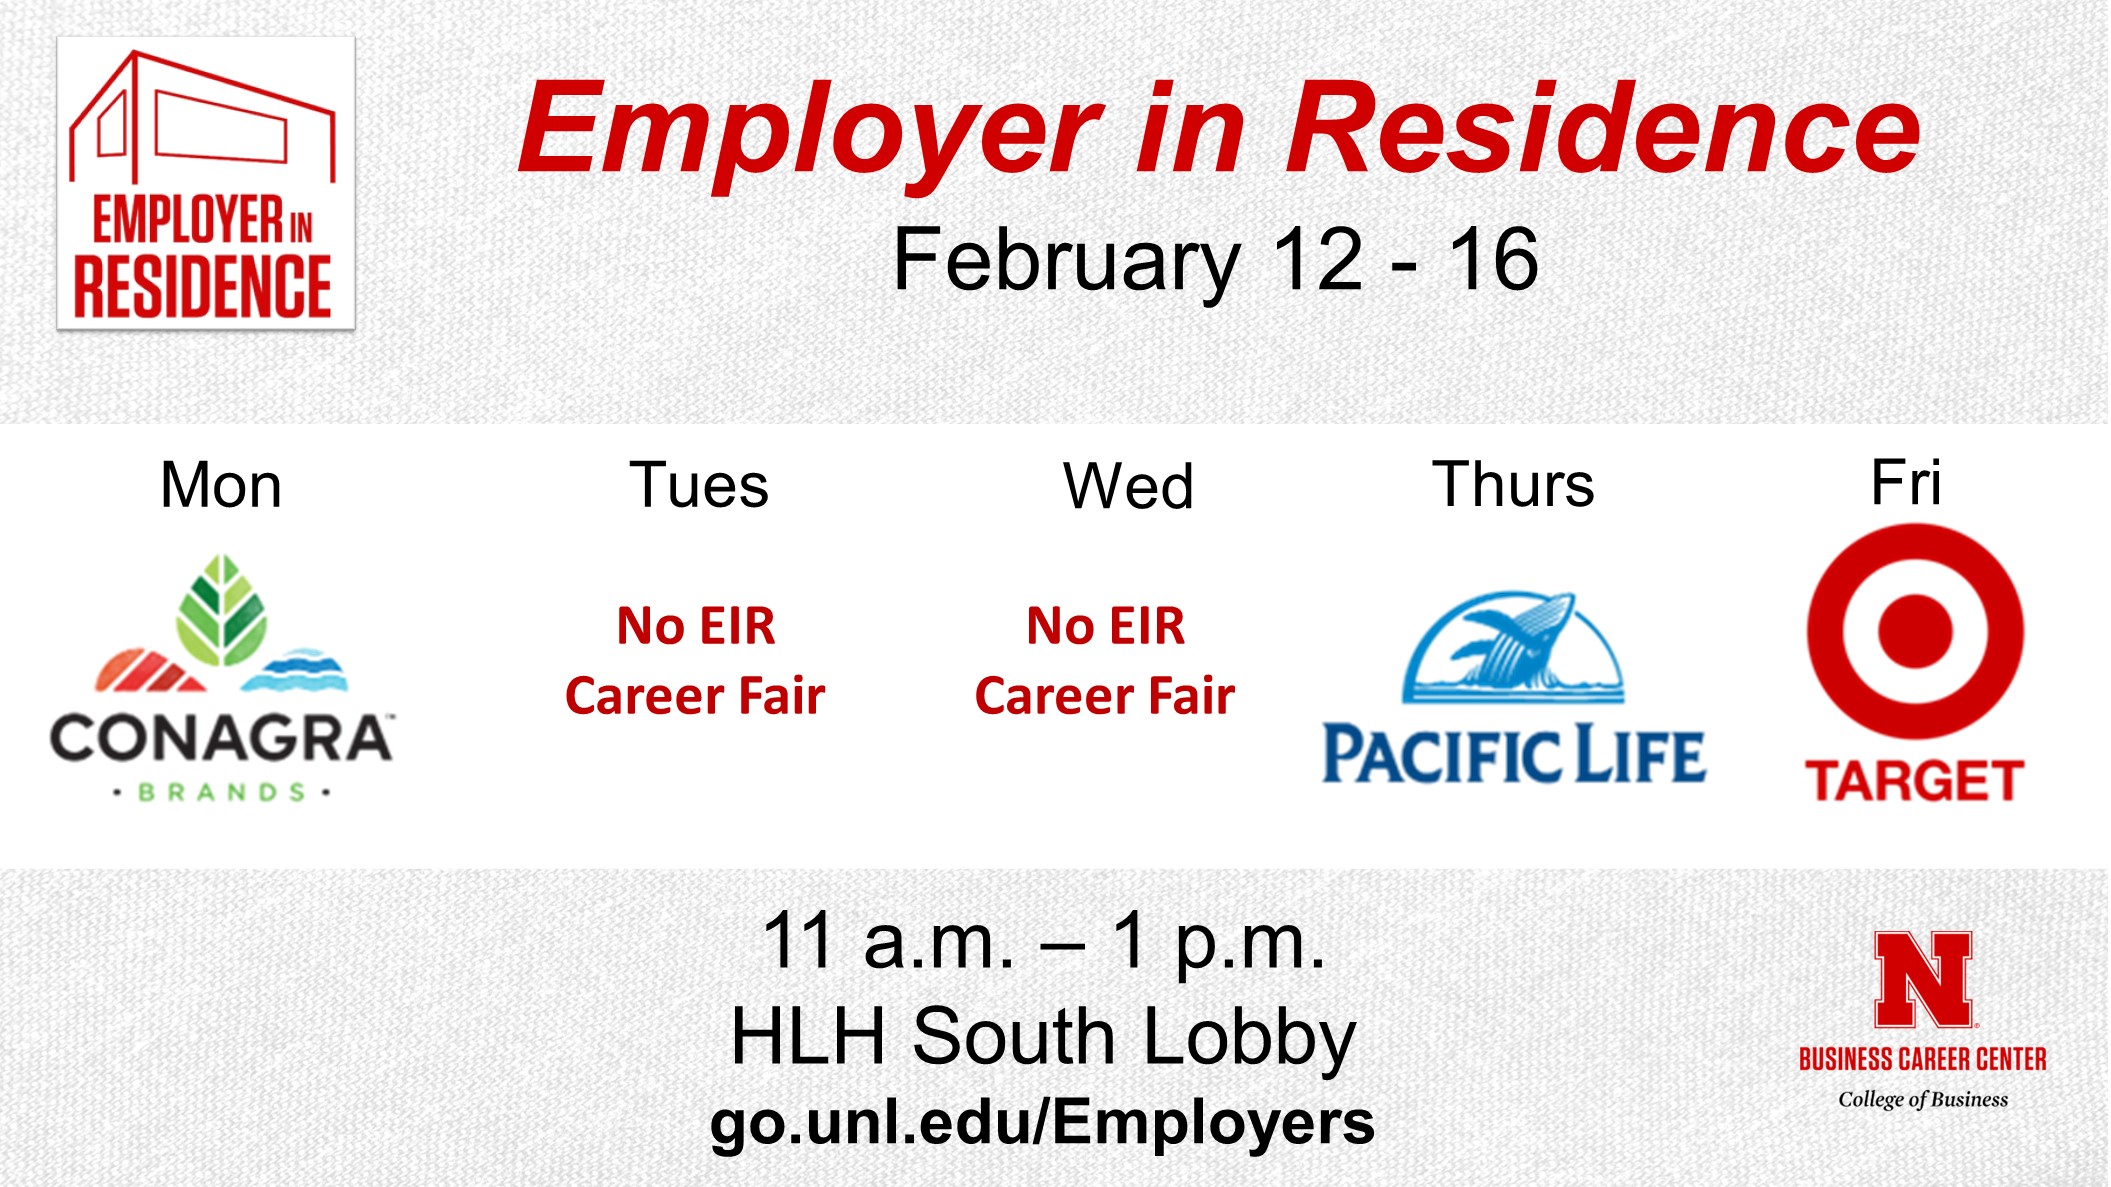 Employer in Residence | Schedule for February 12 - 16